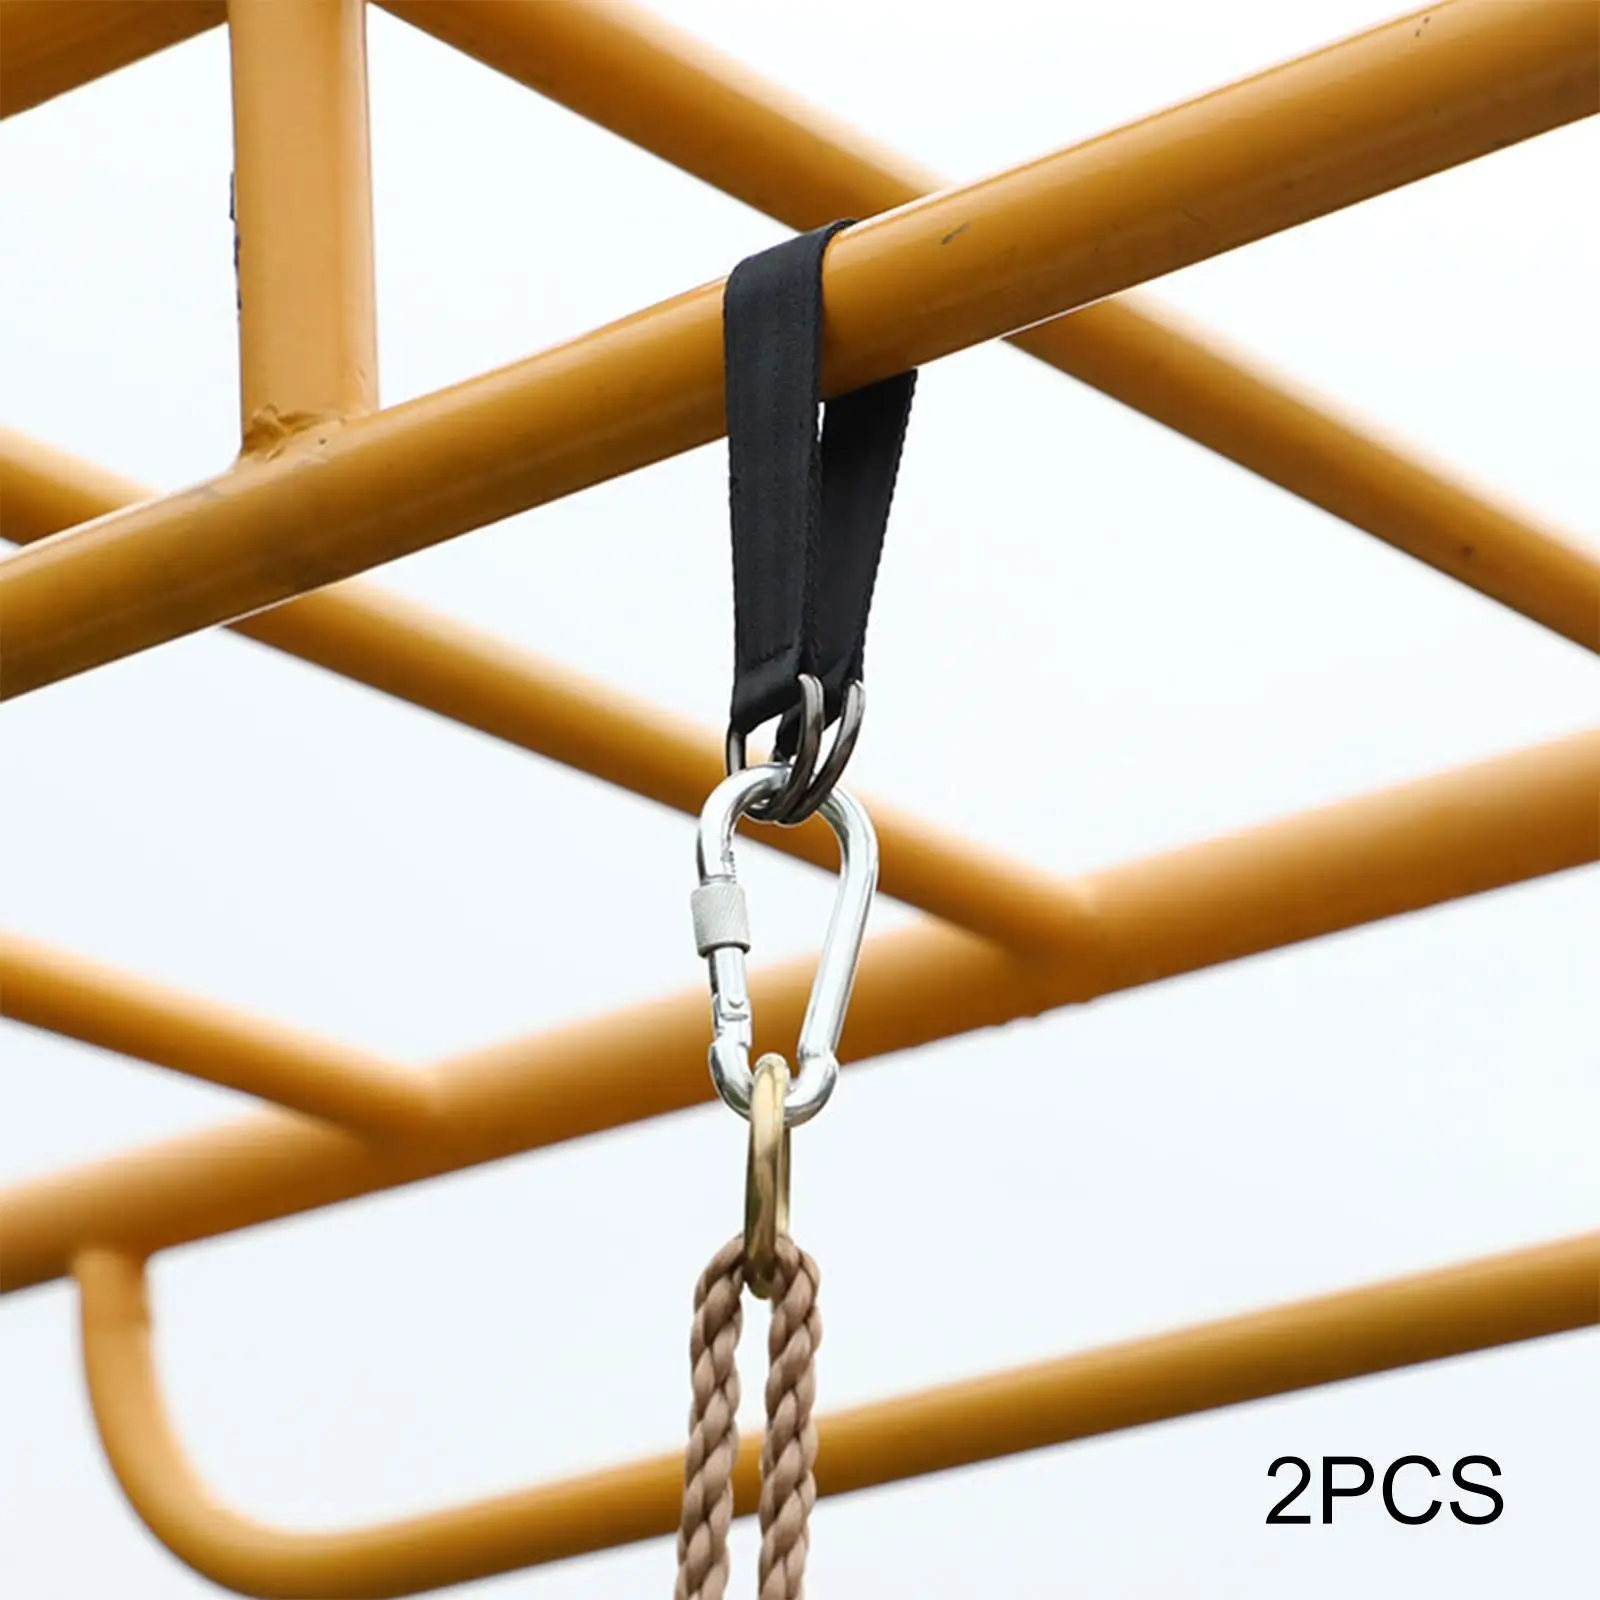 Hanging Straps 2 Pieces Installation Heavy Duty Straps Swings Hammocks Pulling up